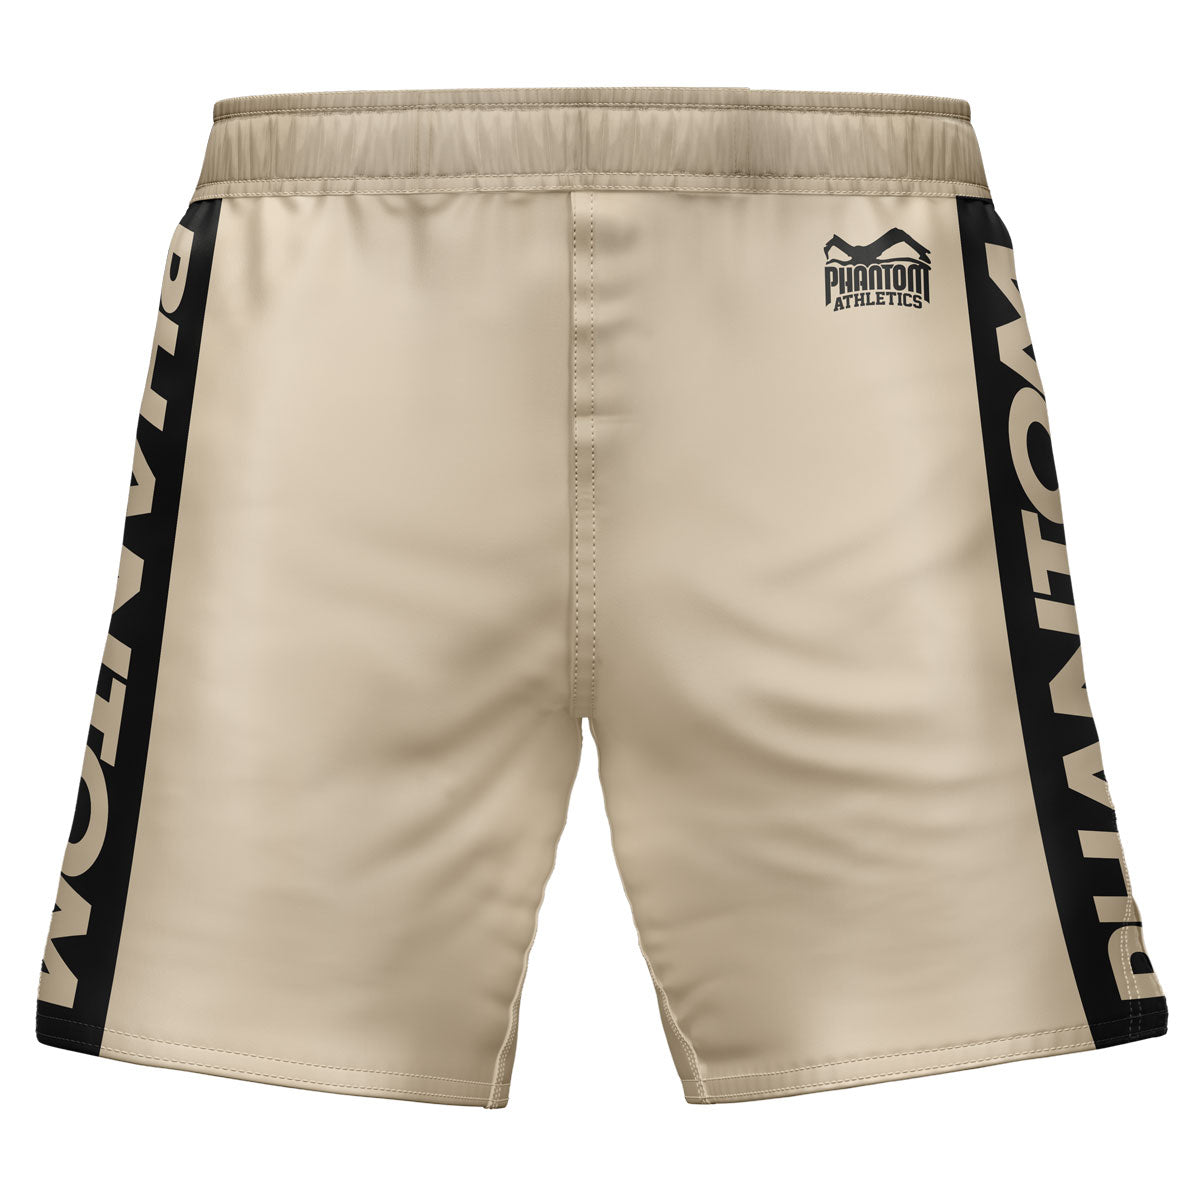 The Phantom EVO Fightshorts are the ideal shorts for your martial arts. No matter whether MMA, BJJ, kickboxing or Muay Thai. Thanks to the ultra-light, elastic, tear-resistant and quick-drying material, they offer full freedom of movement and maximum comfort so that you can concentrate entirely on your fight or training. Here in the color sand beige.